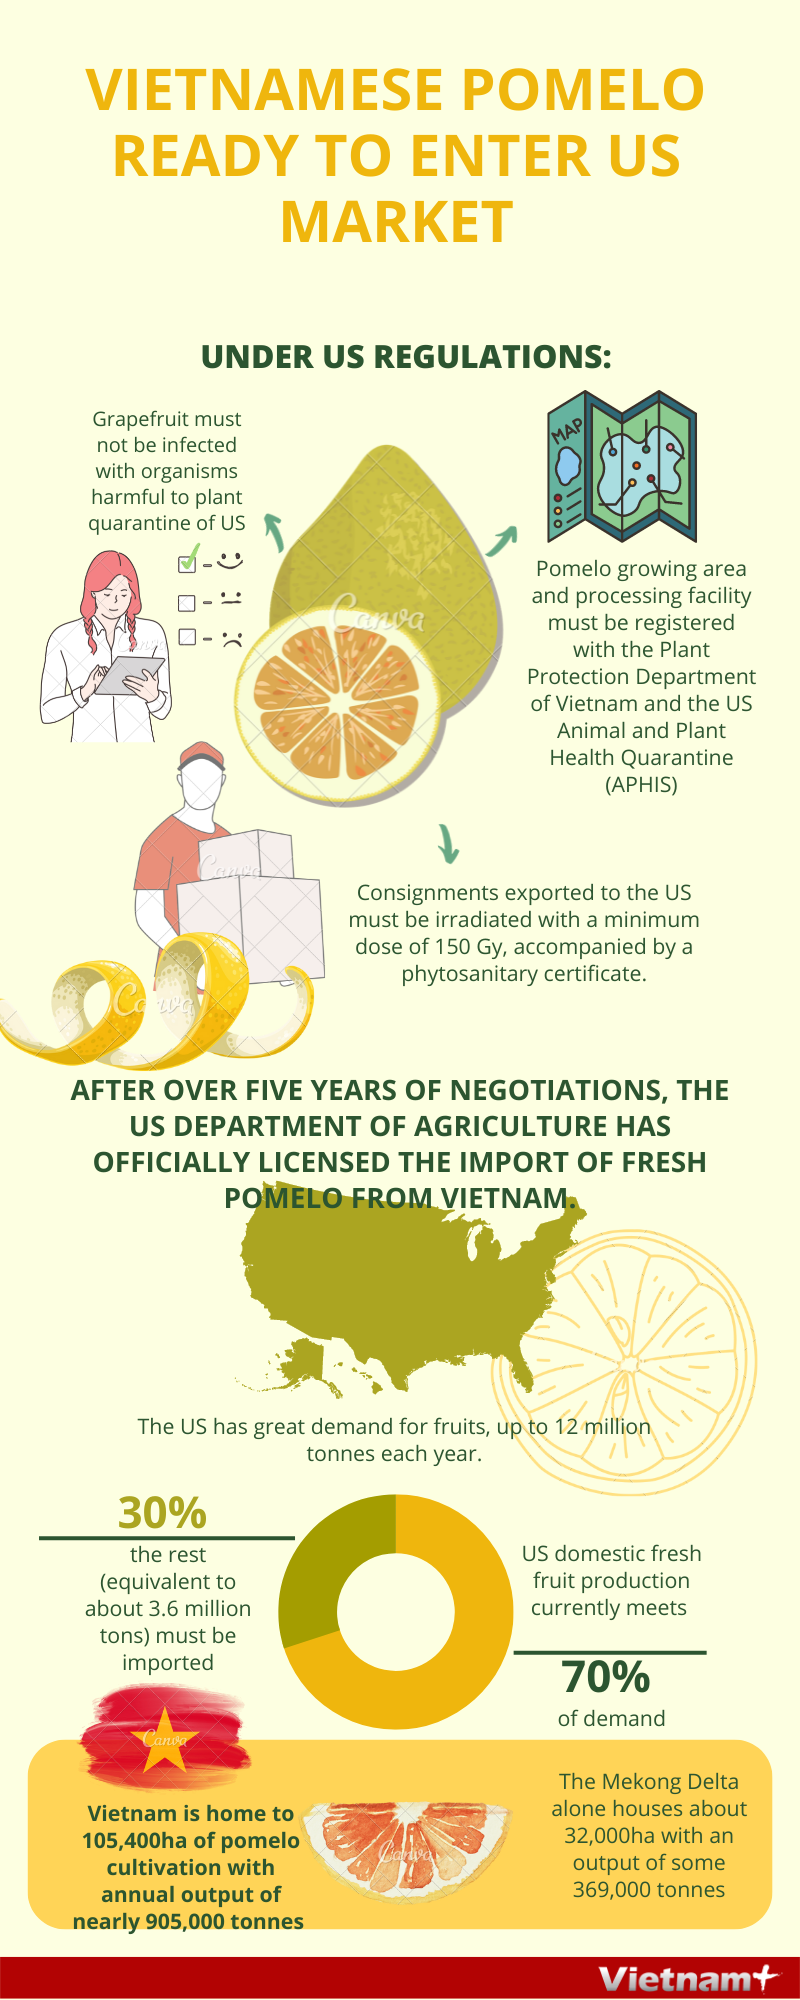 Vietnamese pomelo gets ready to enter US market hinh anh 1